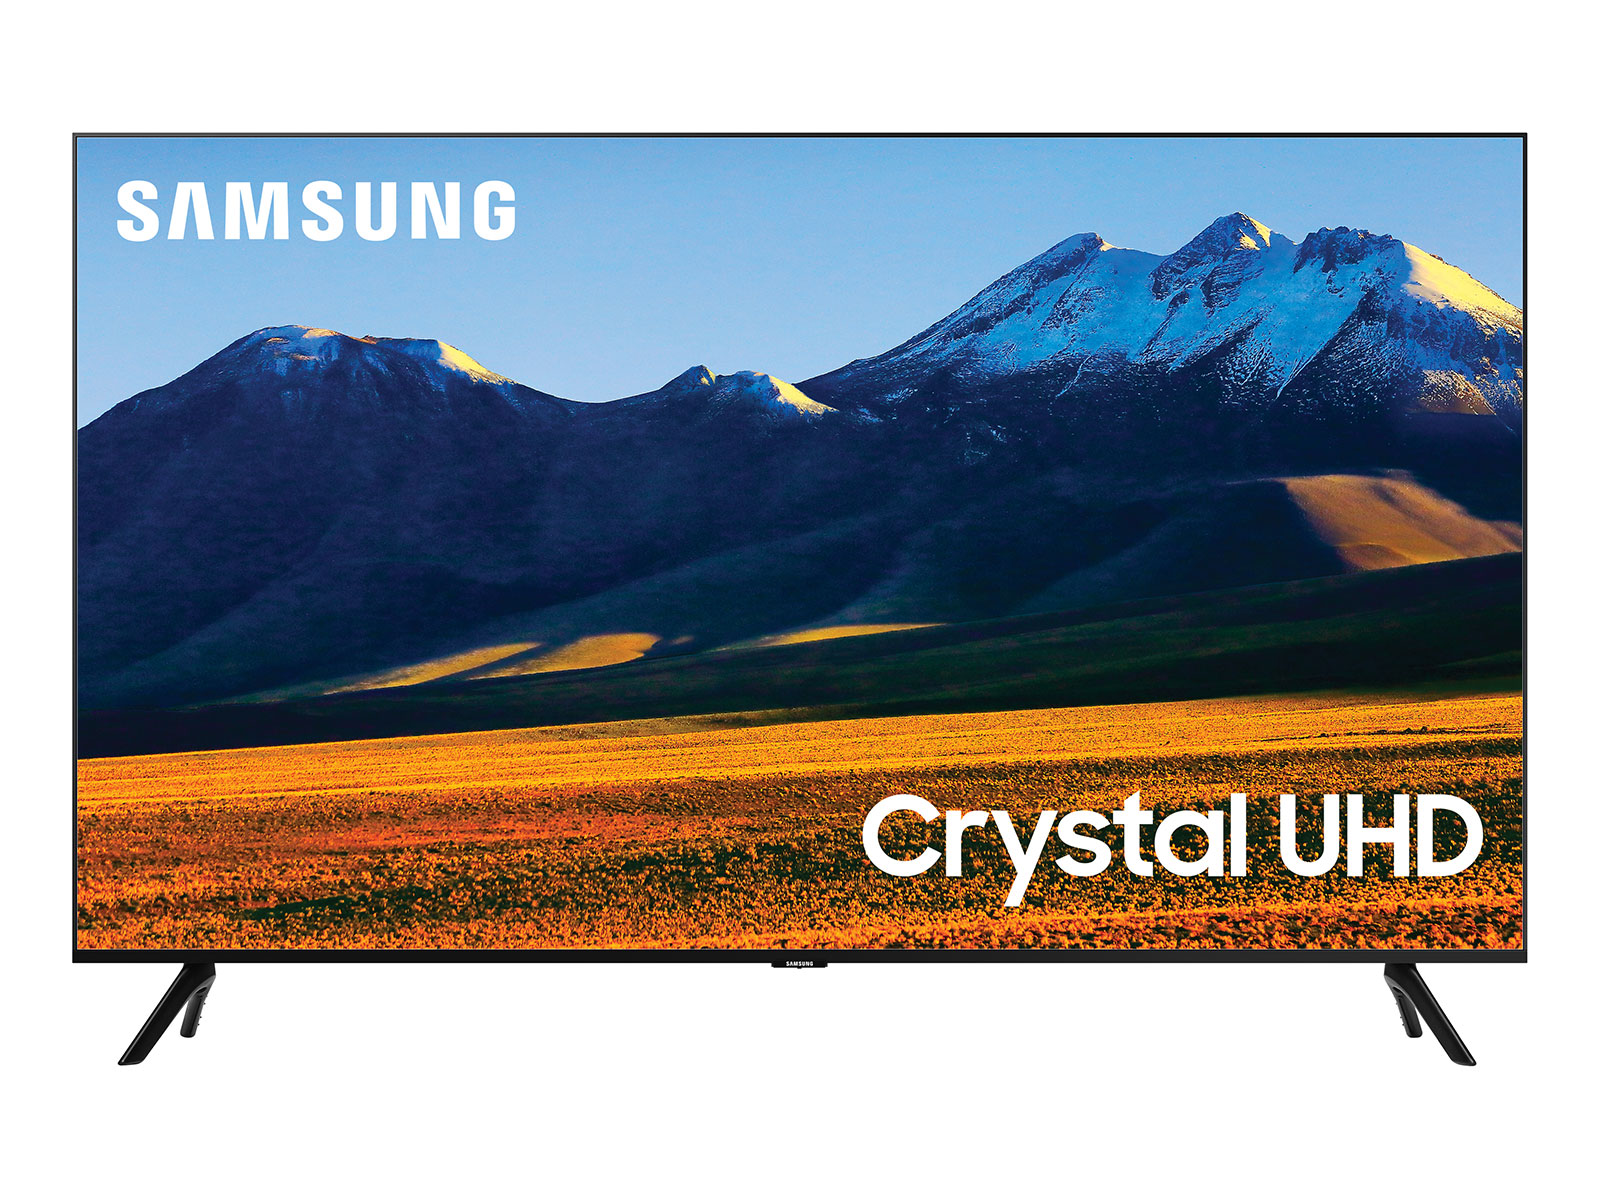 https://image-us.samsung.com/SamsungUS/home/televisions-and-home-theater/tvs/crystal-uhd-tvs/un85tu8000fxza/gallery/01-TU9000_011_Front3_Black-Metal-Gallery-1600x1200.jpg?$product-card-small-jpg$